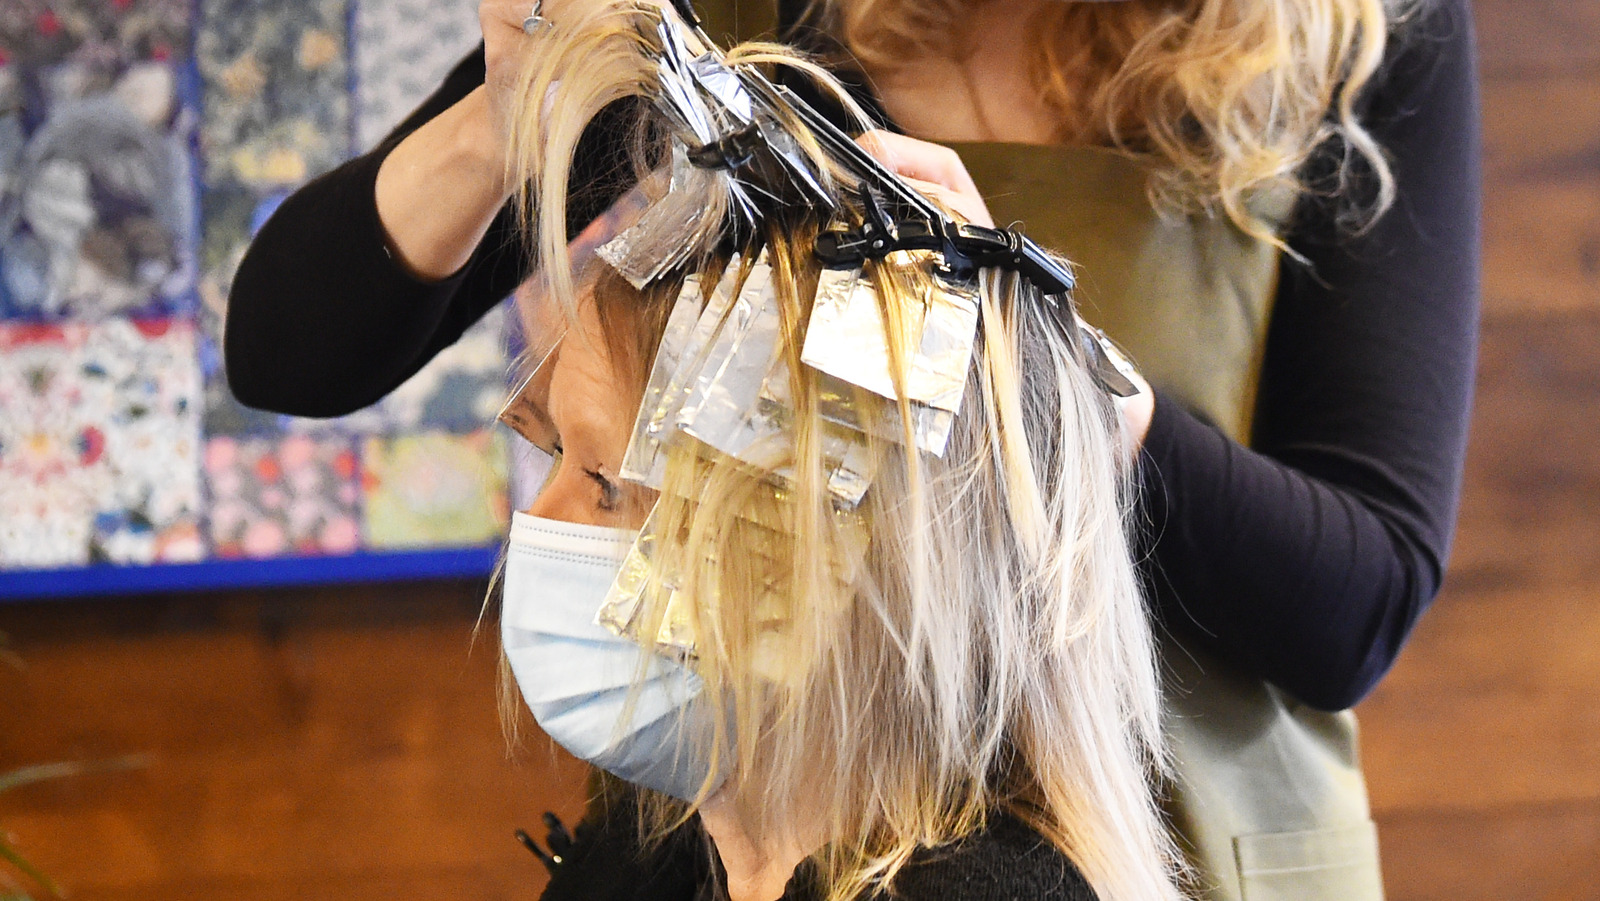 https://www.glam.com/img/gallery/balayage-or-foil-highlights-which-hair-coloring-style-is-right-for-you/l-intro-1660432381.jpg